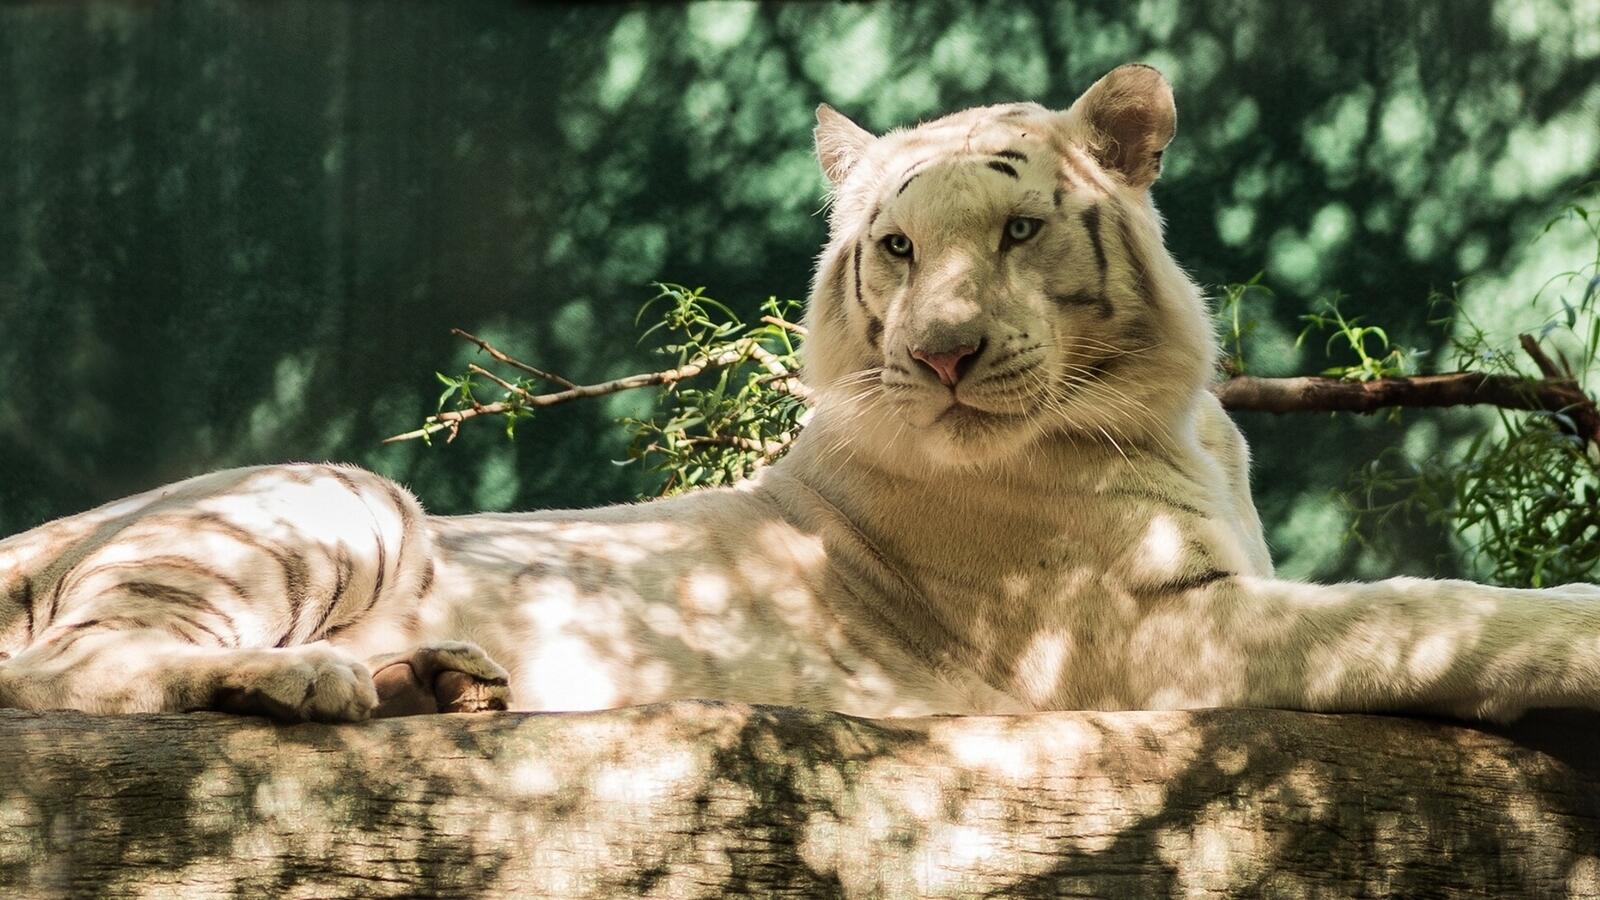 Free photo The white tiger is resting